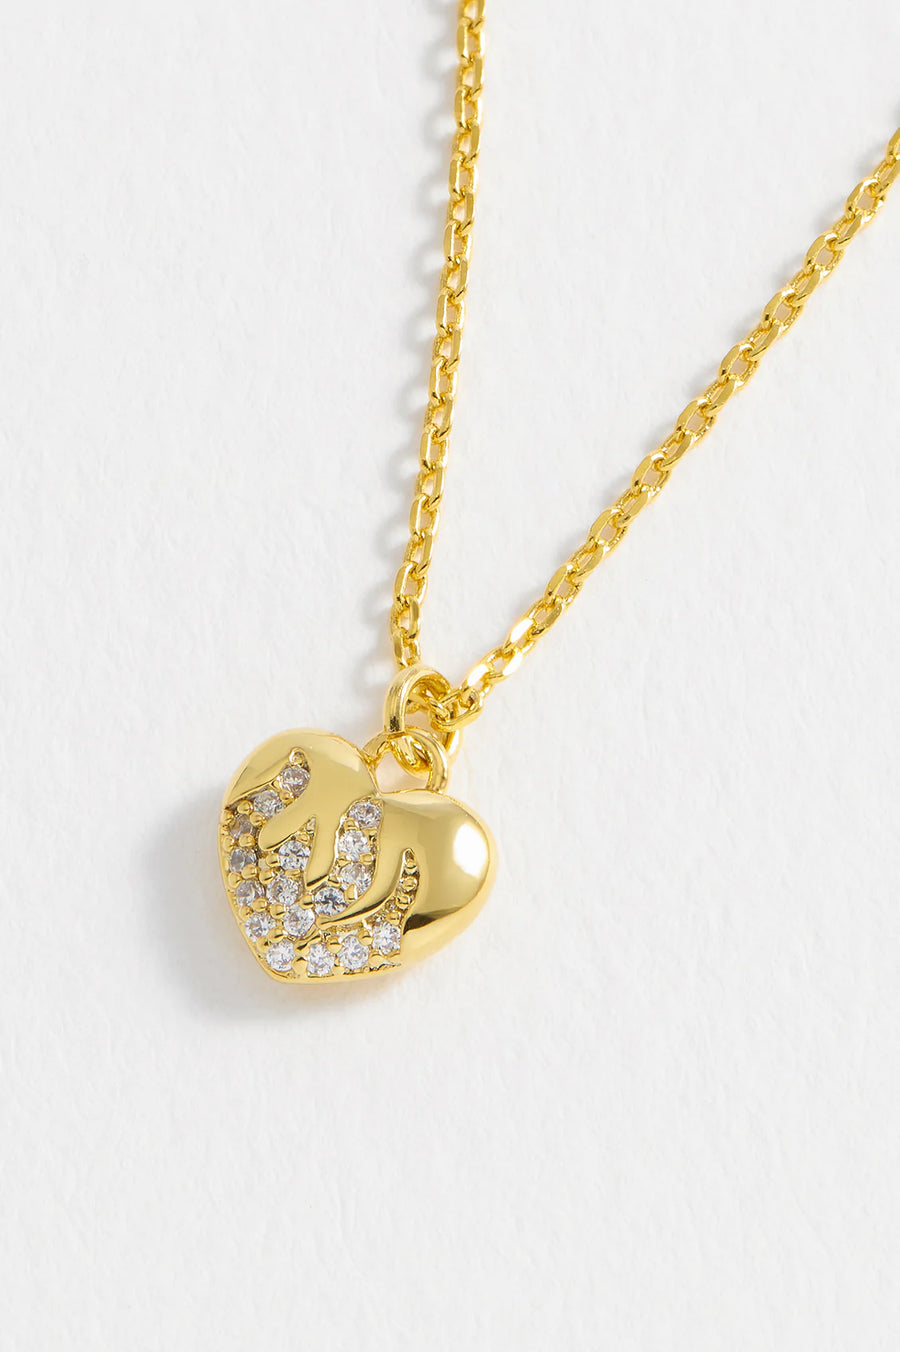 Flame Heart Necklace - Gold Plated